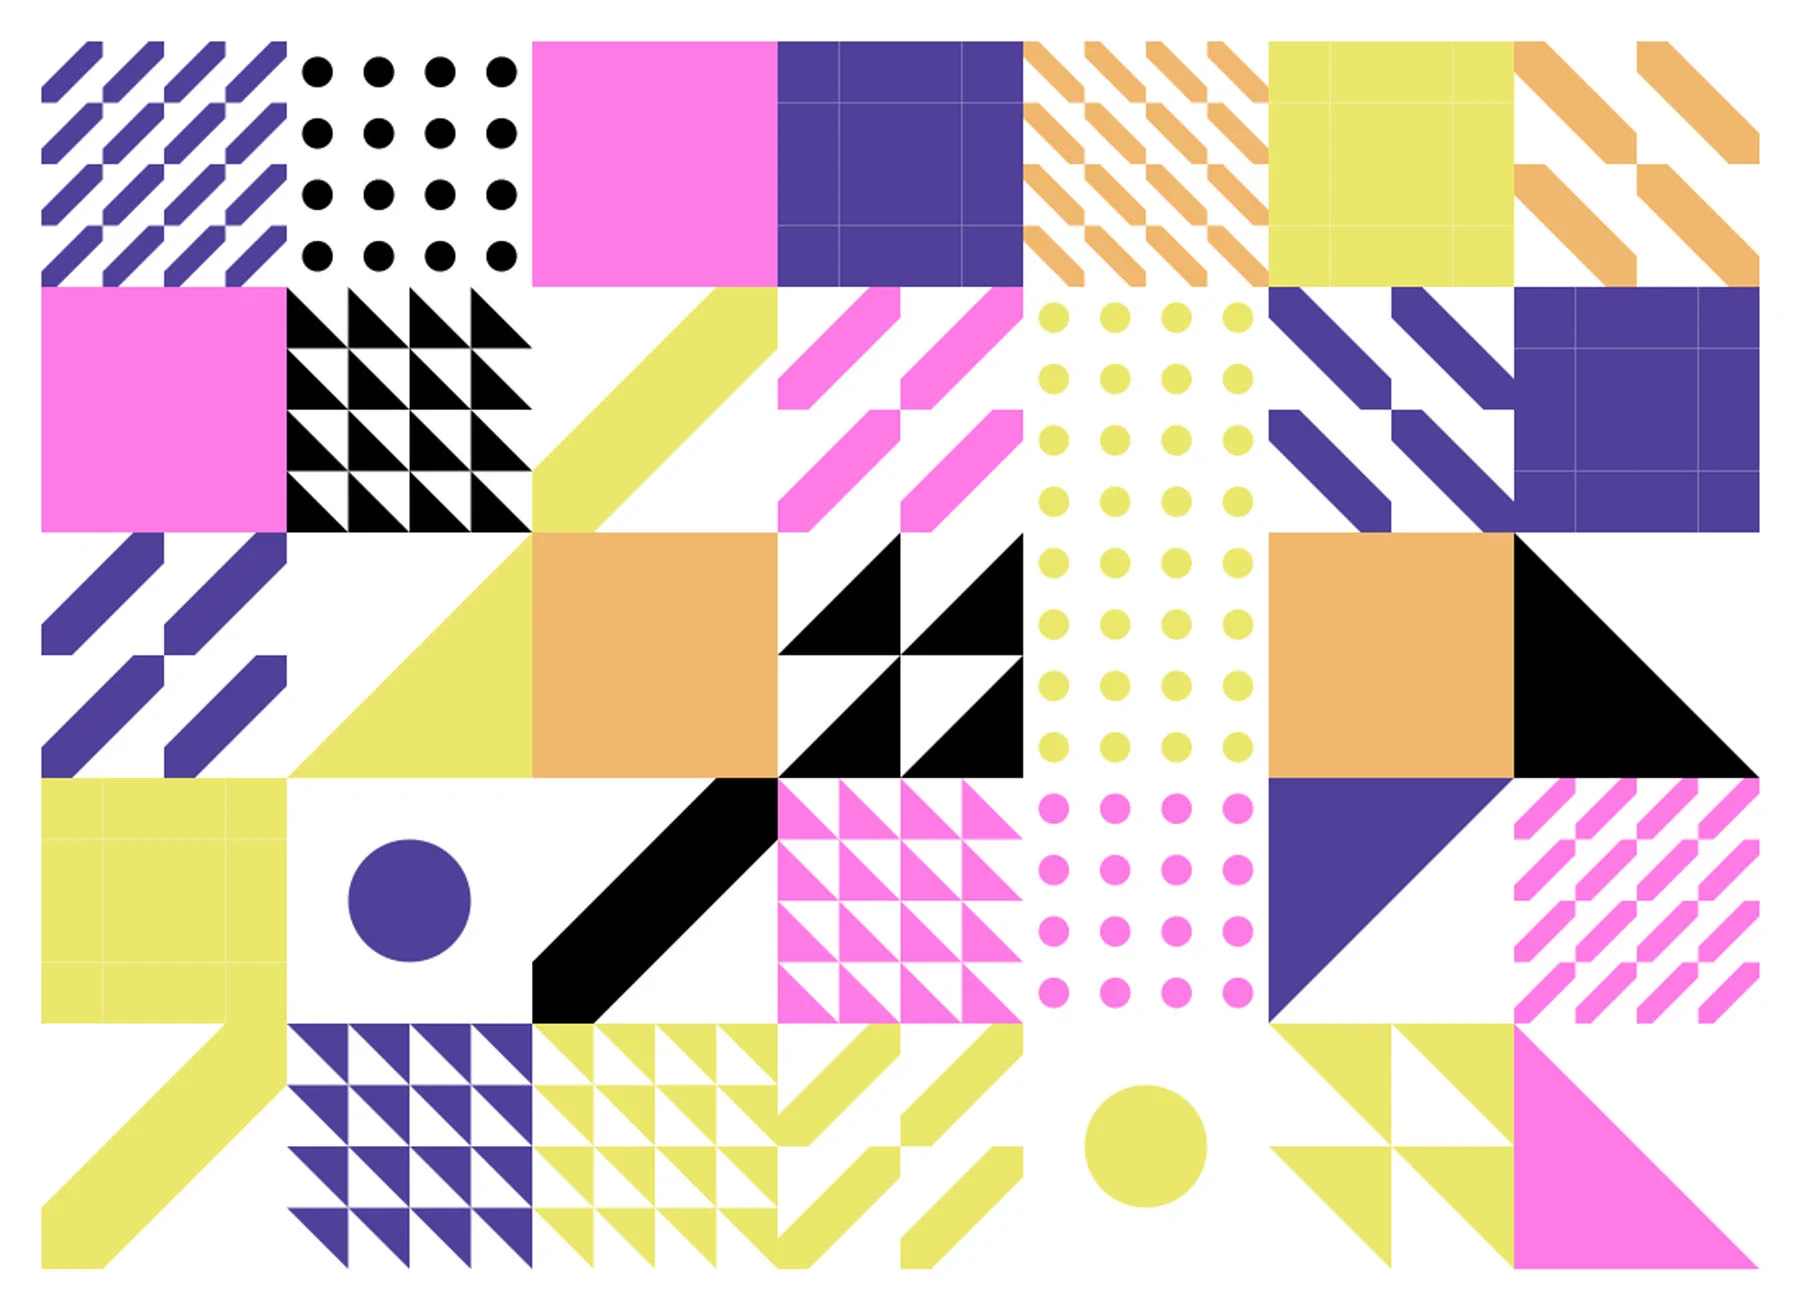 Generative artwork, 18x18 grid with multiple grids of shapes. Circles, triangles, squares and elongated hexagons. Shapes have no outline and fills are black, violet, purple, yellow, light-orange. White background. 